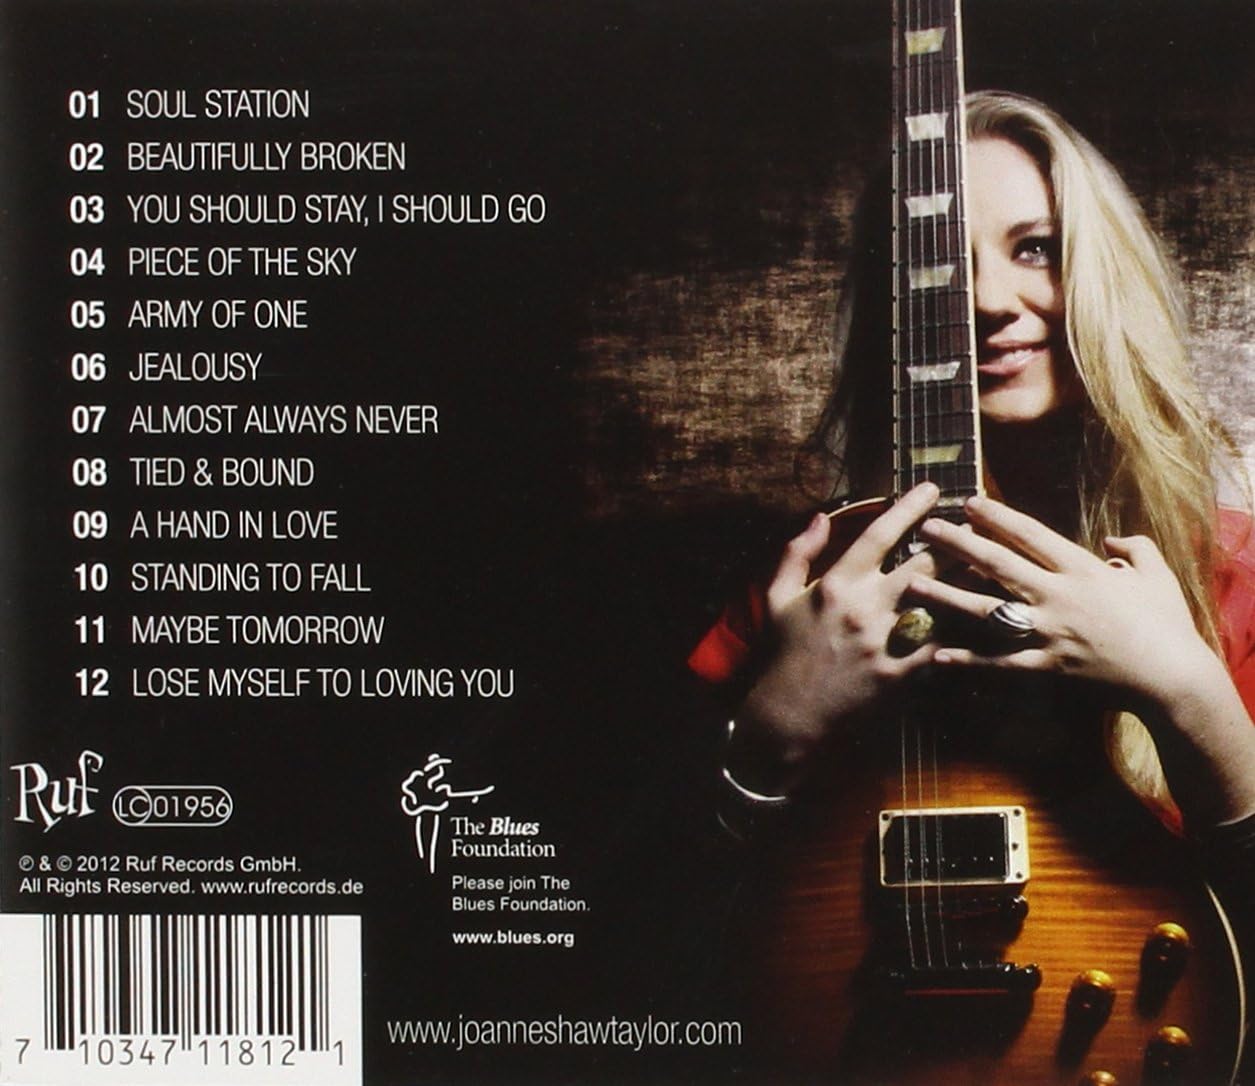 Joanne Shaw Taylor - Almost Always Never - USED CD